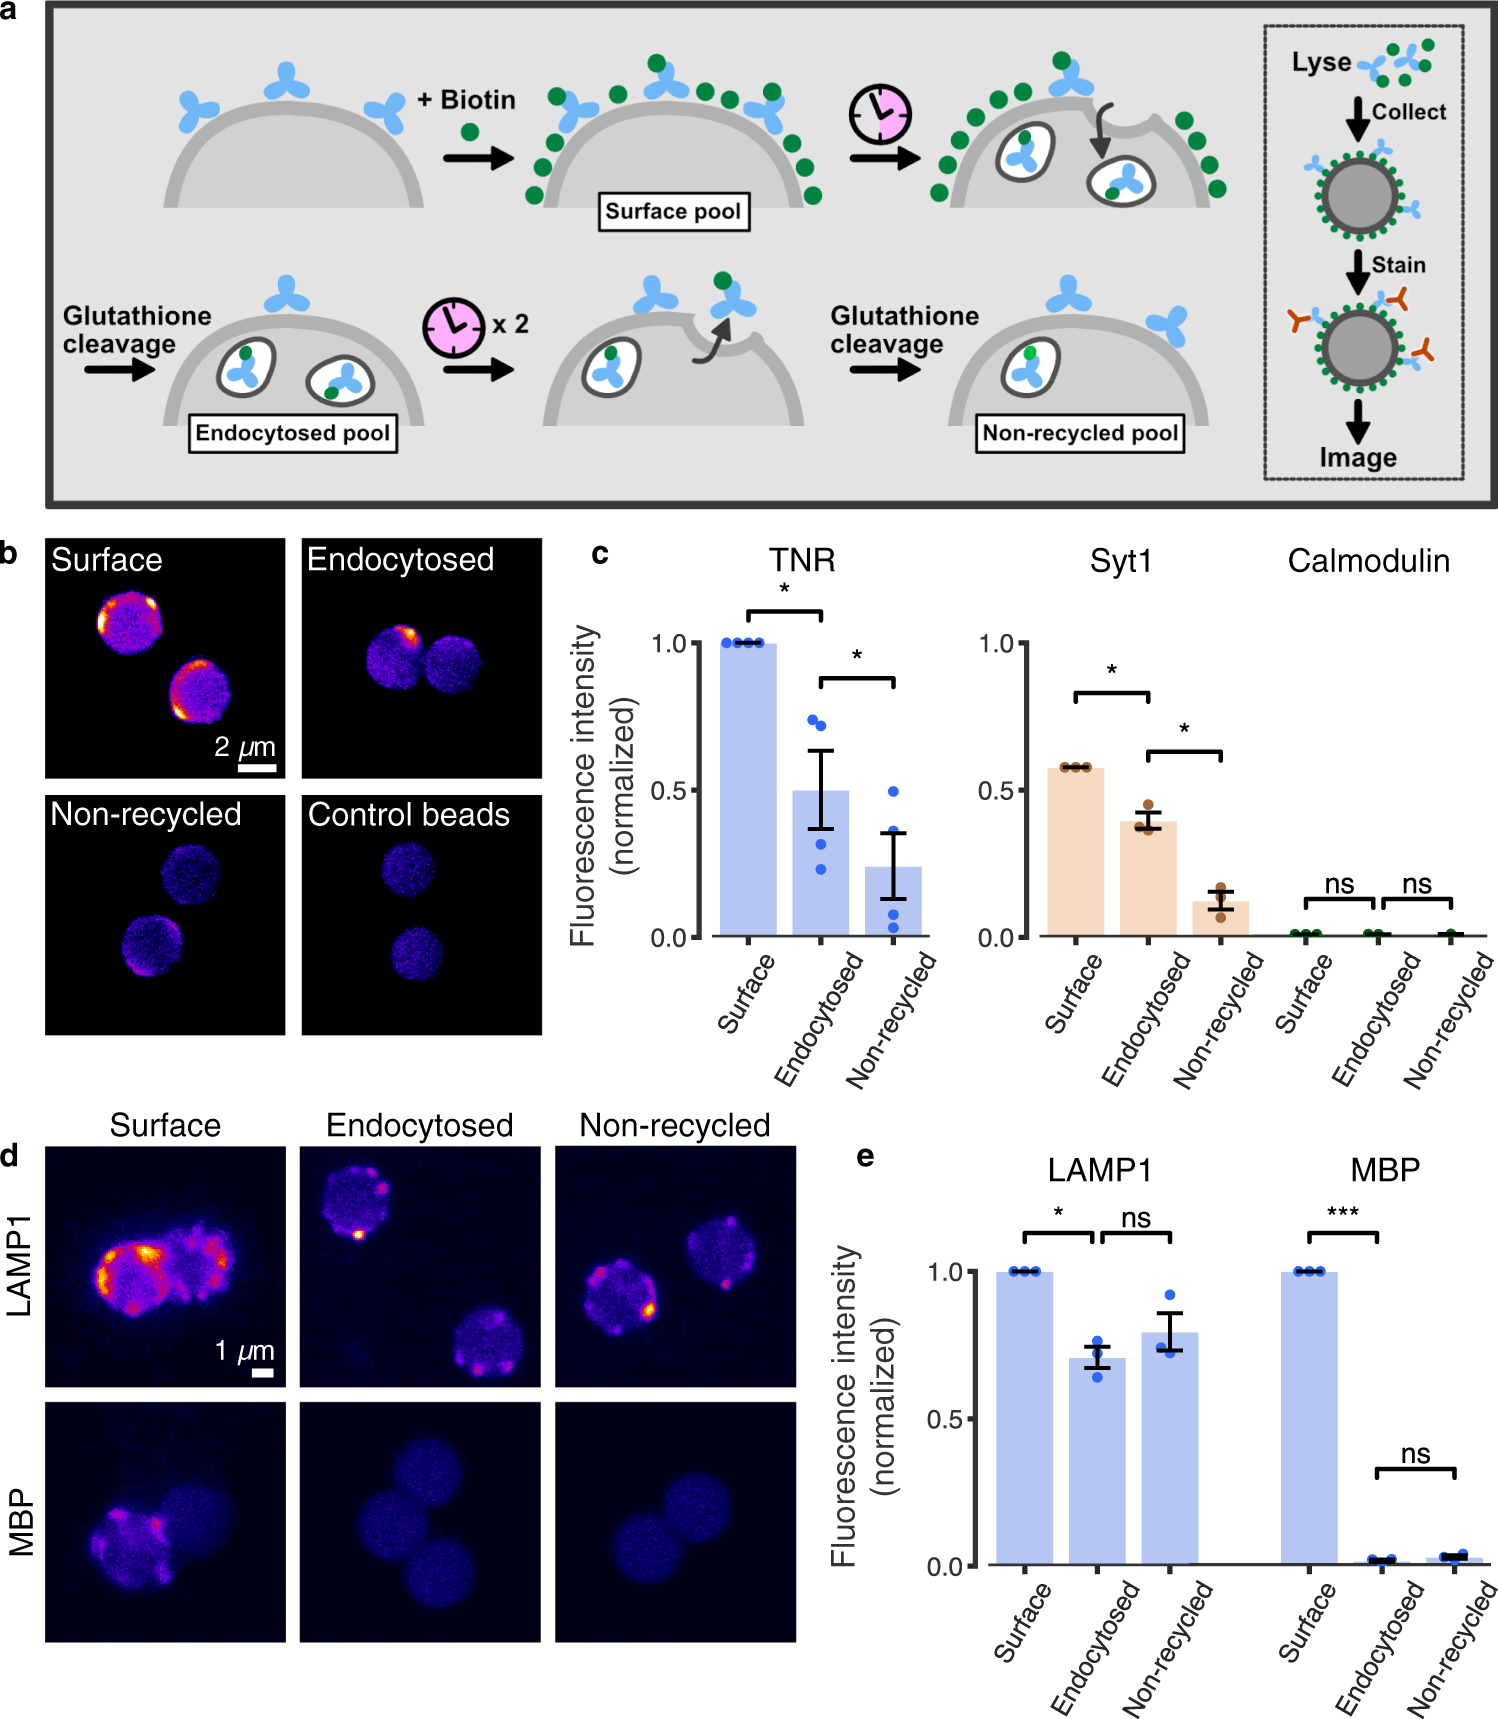 Extracellular matrix remodeling through endocytosis and